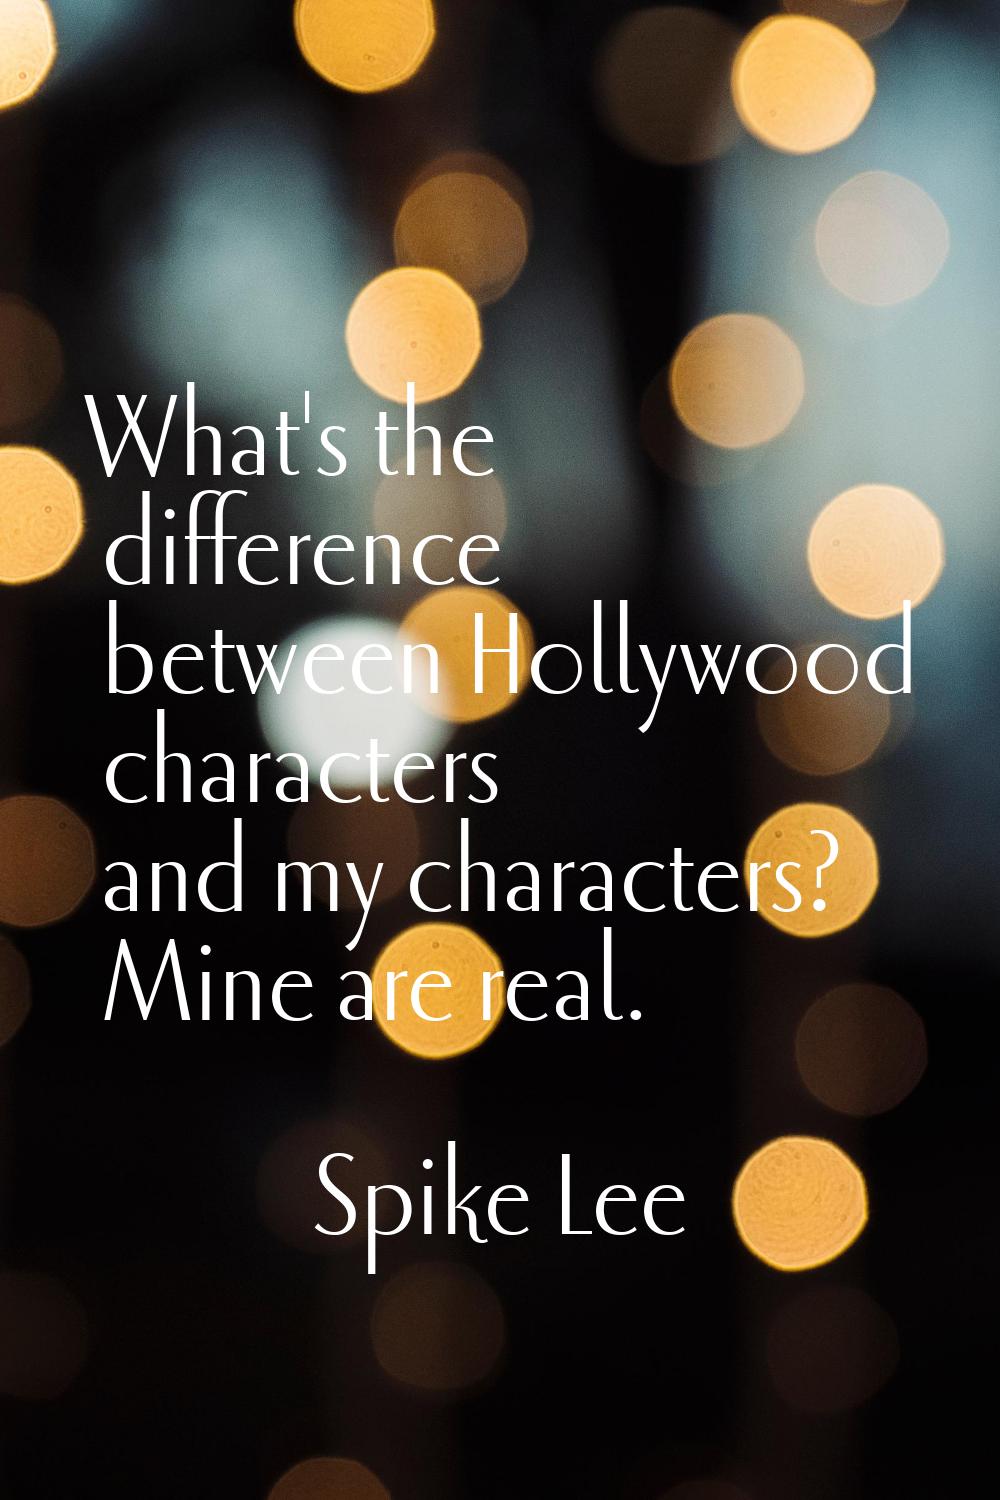 What's the difference between Hollywood characters and my characters? Mine are real.